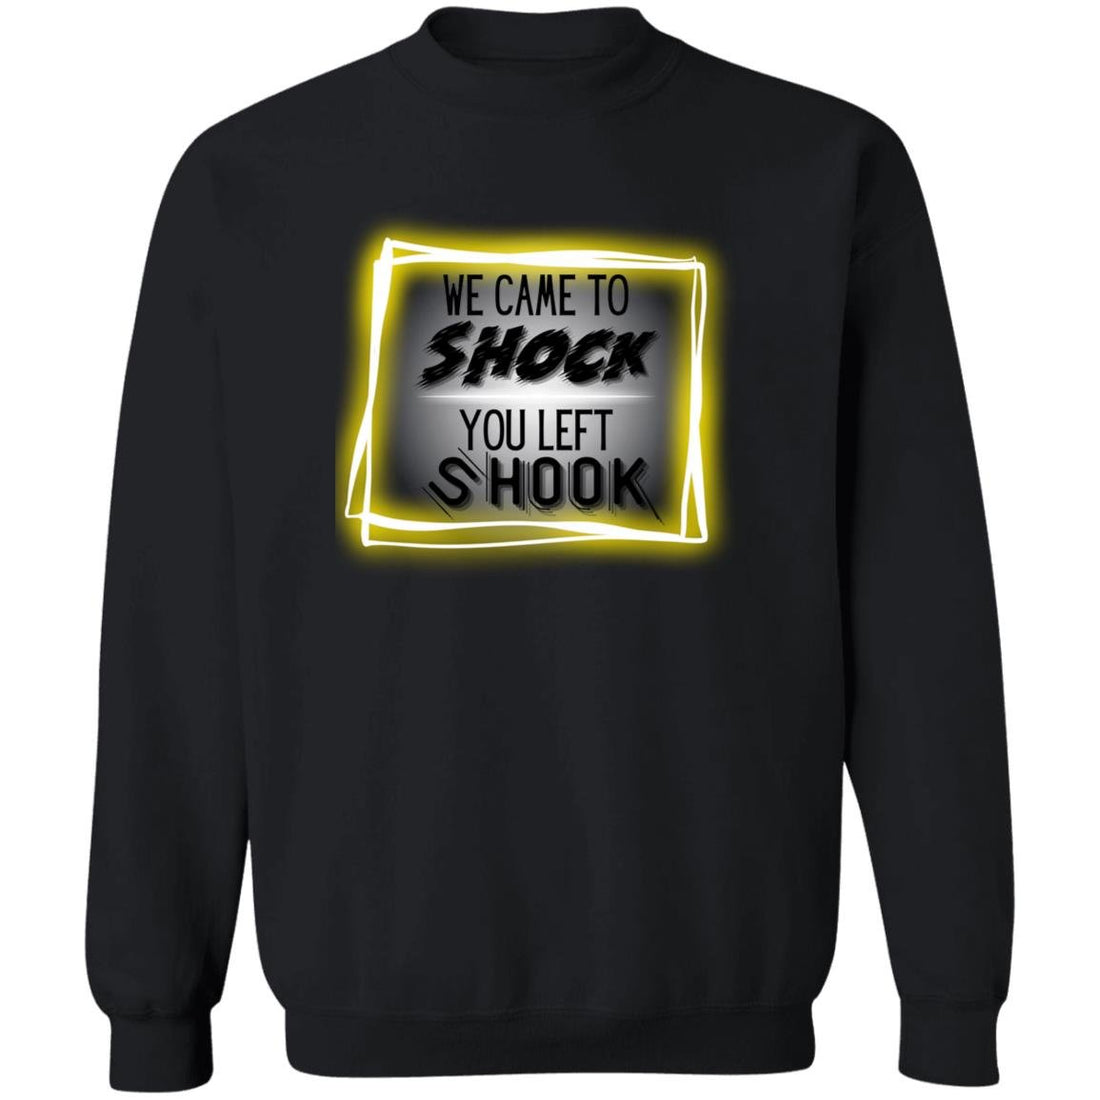 We Came To Shock You Crewneck Pullover Sweatshirt - Sweatshirts - Positively Sassy - We Came To Shock You Crewneck Pullover Sweatshirt